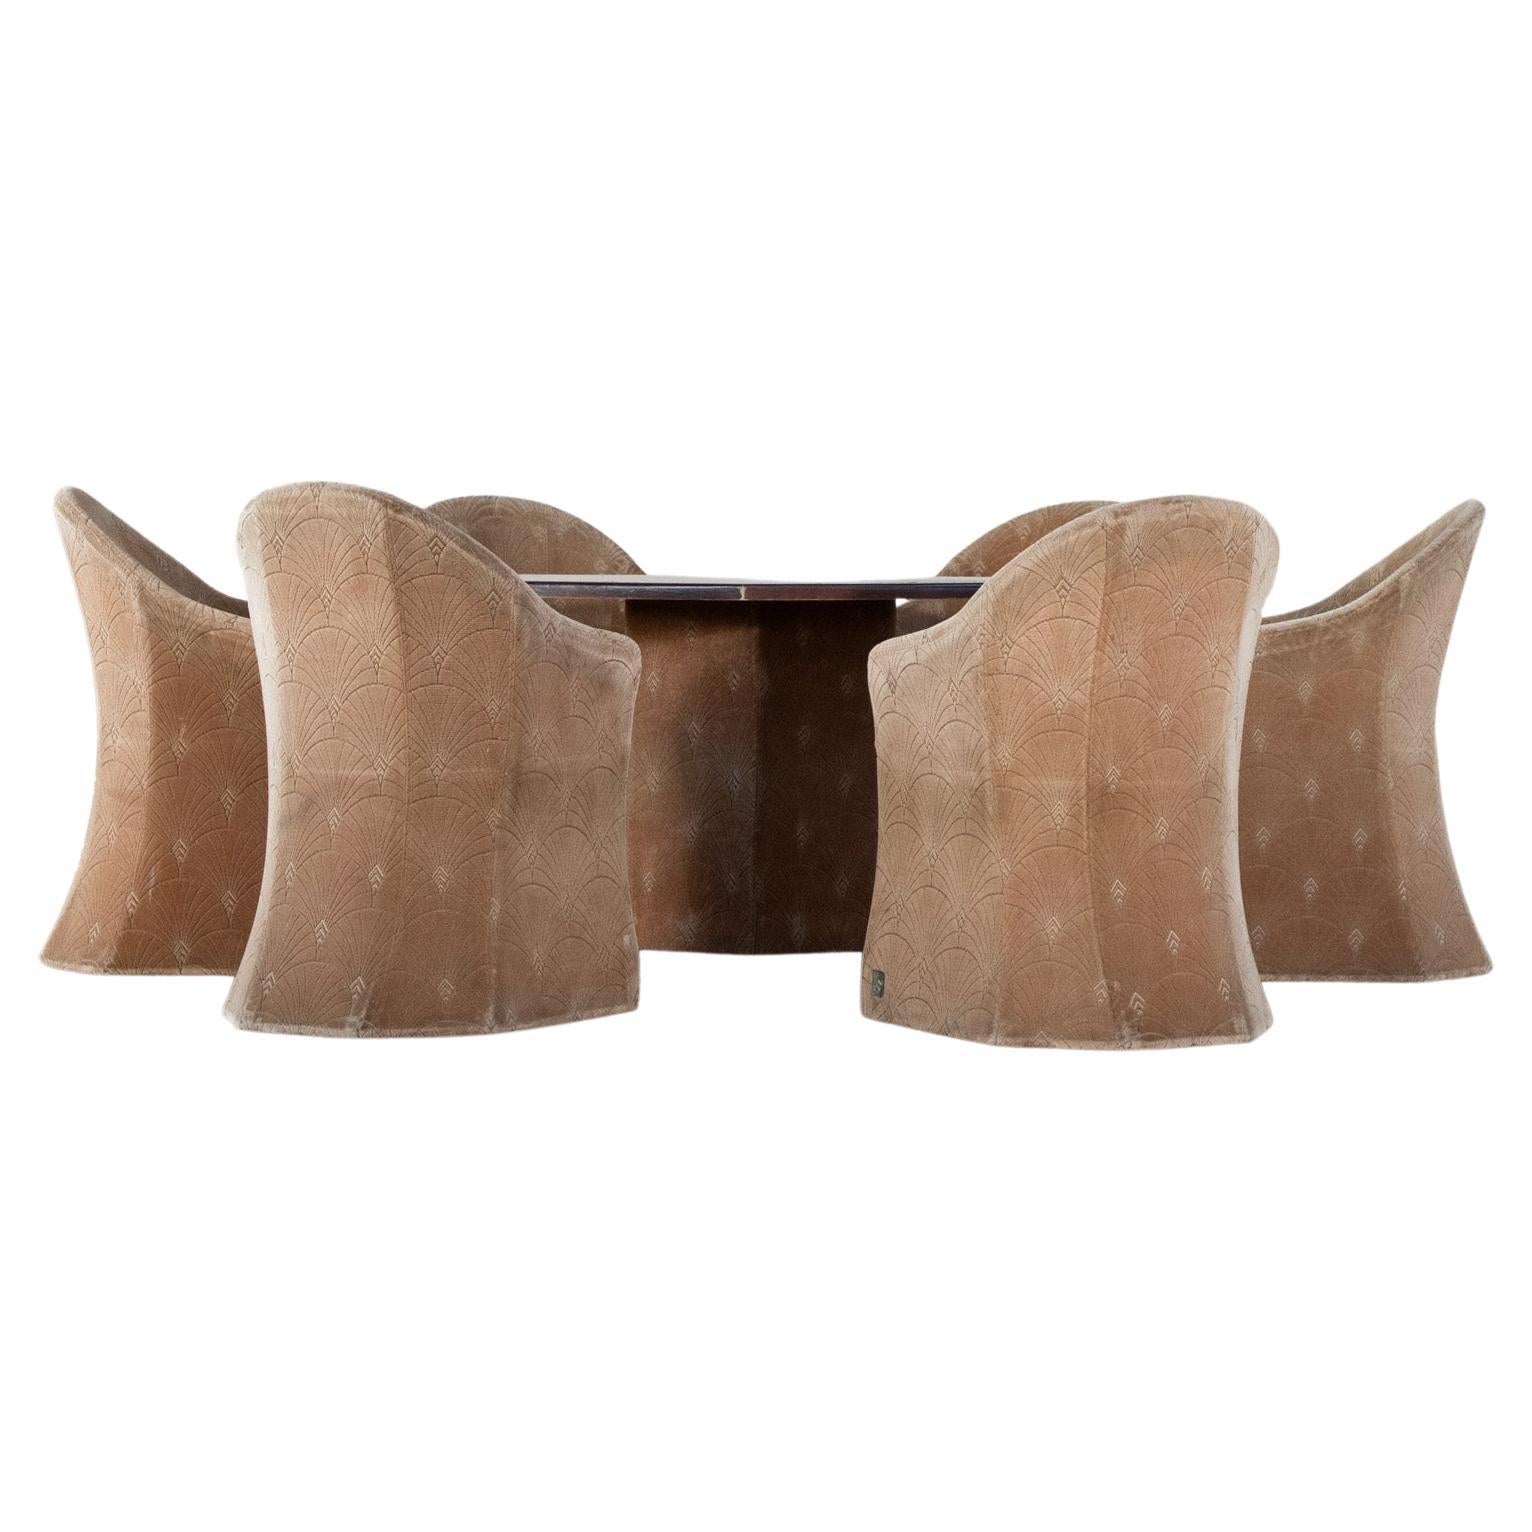 Pierre Cardin Velvet Shell dining table and chairs For Sale